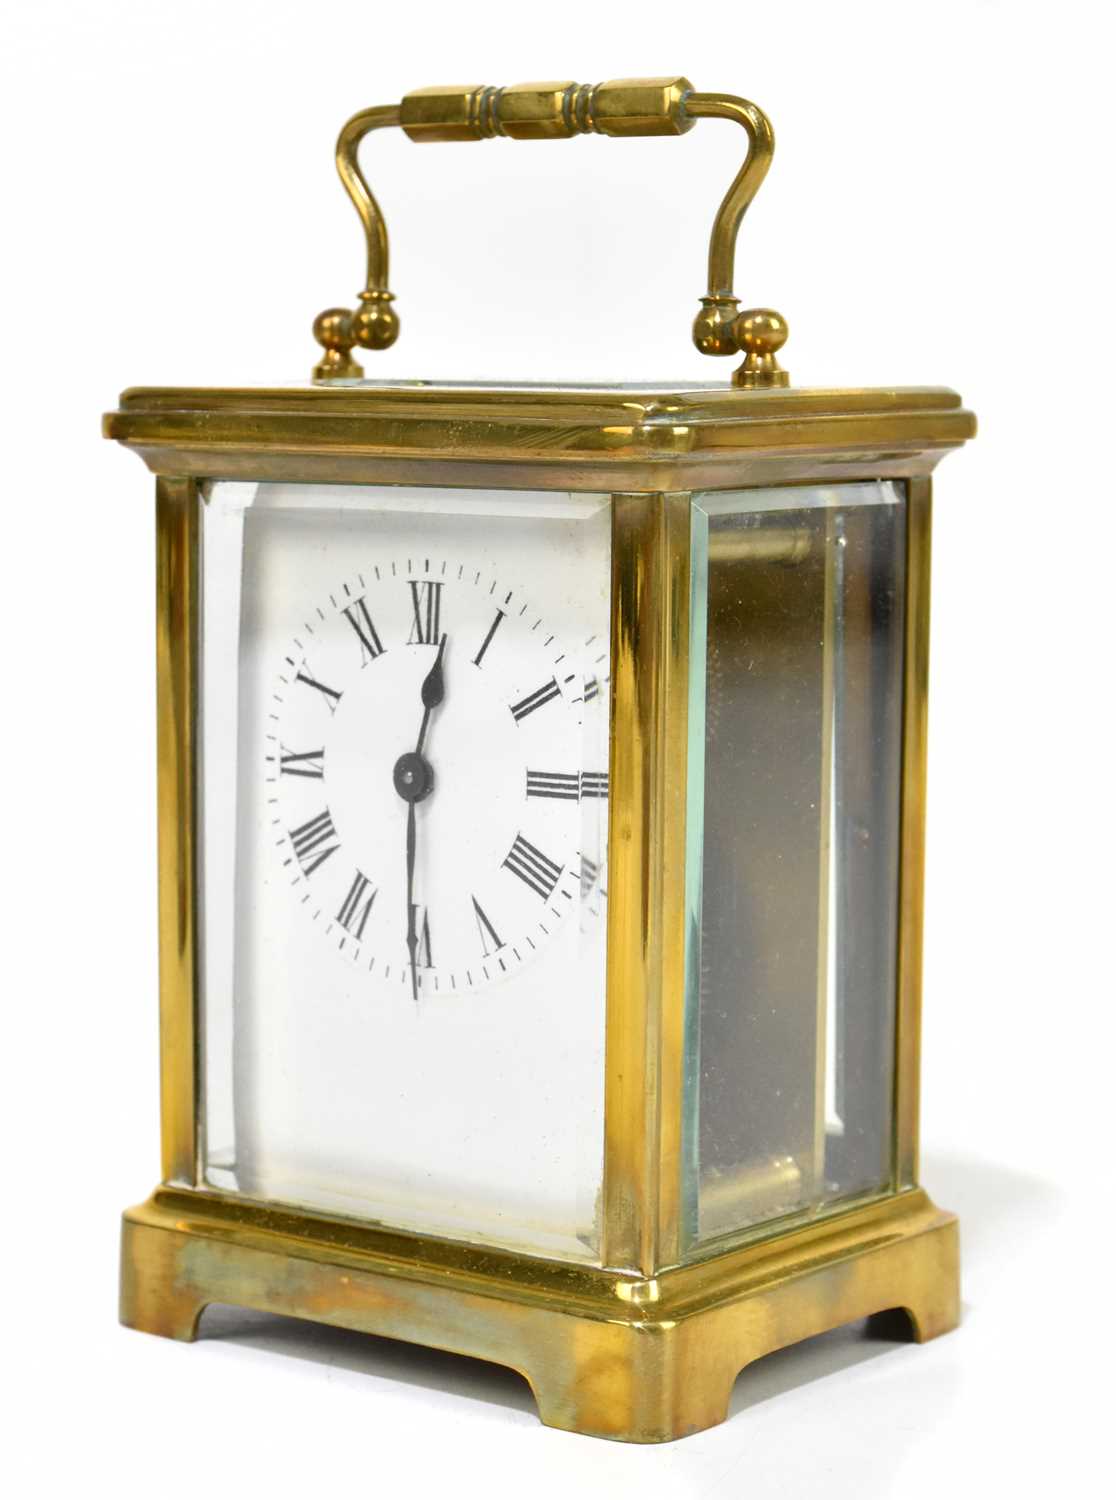 A late 19th century French lacquered brass carriage time piece, with enamelled Roman numeral dial